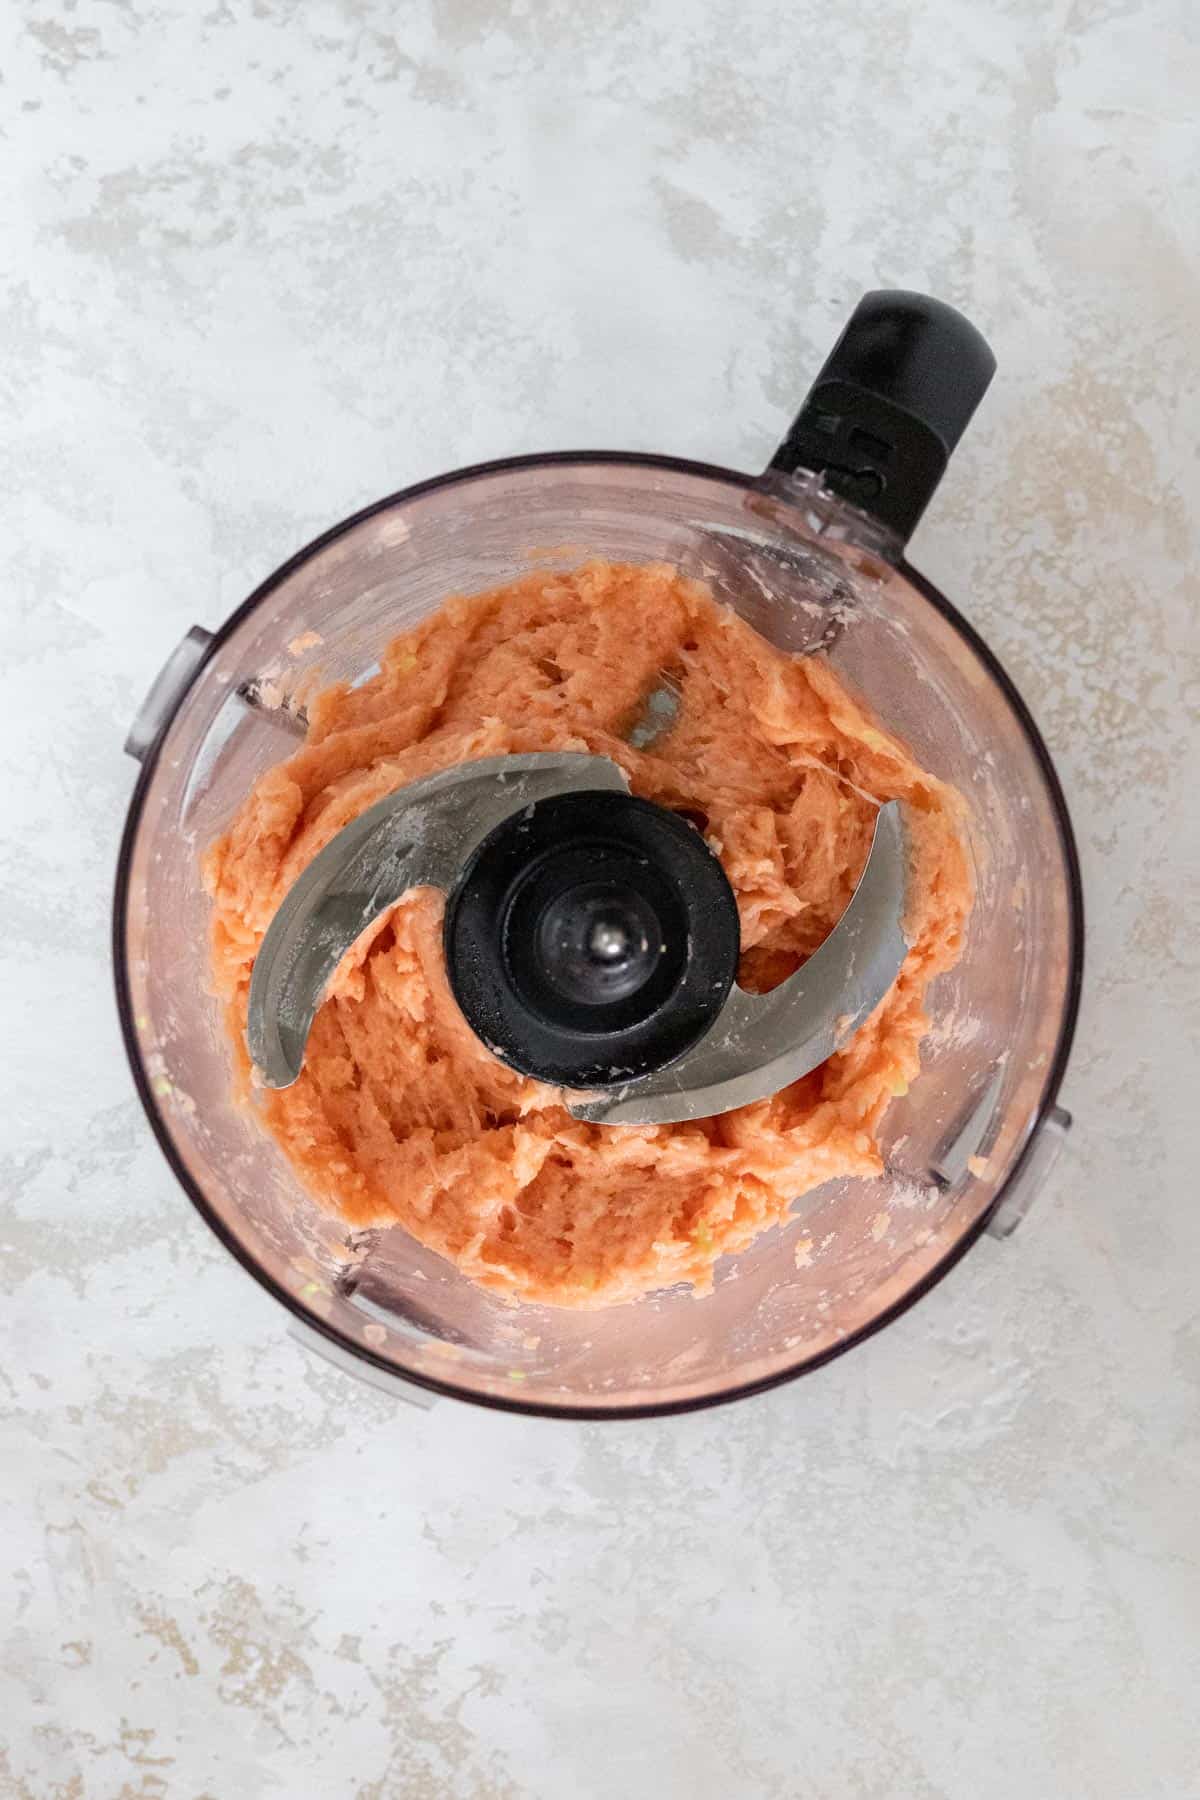 Pulsed salmon in a food processor.